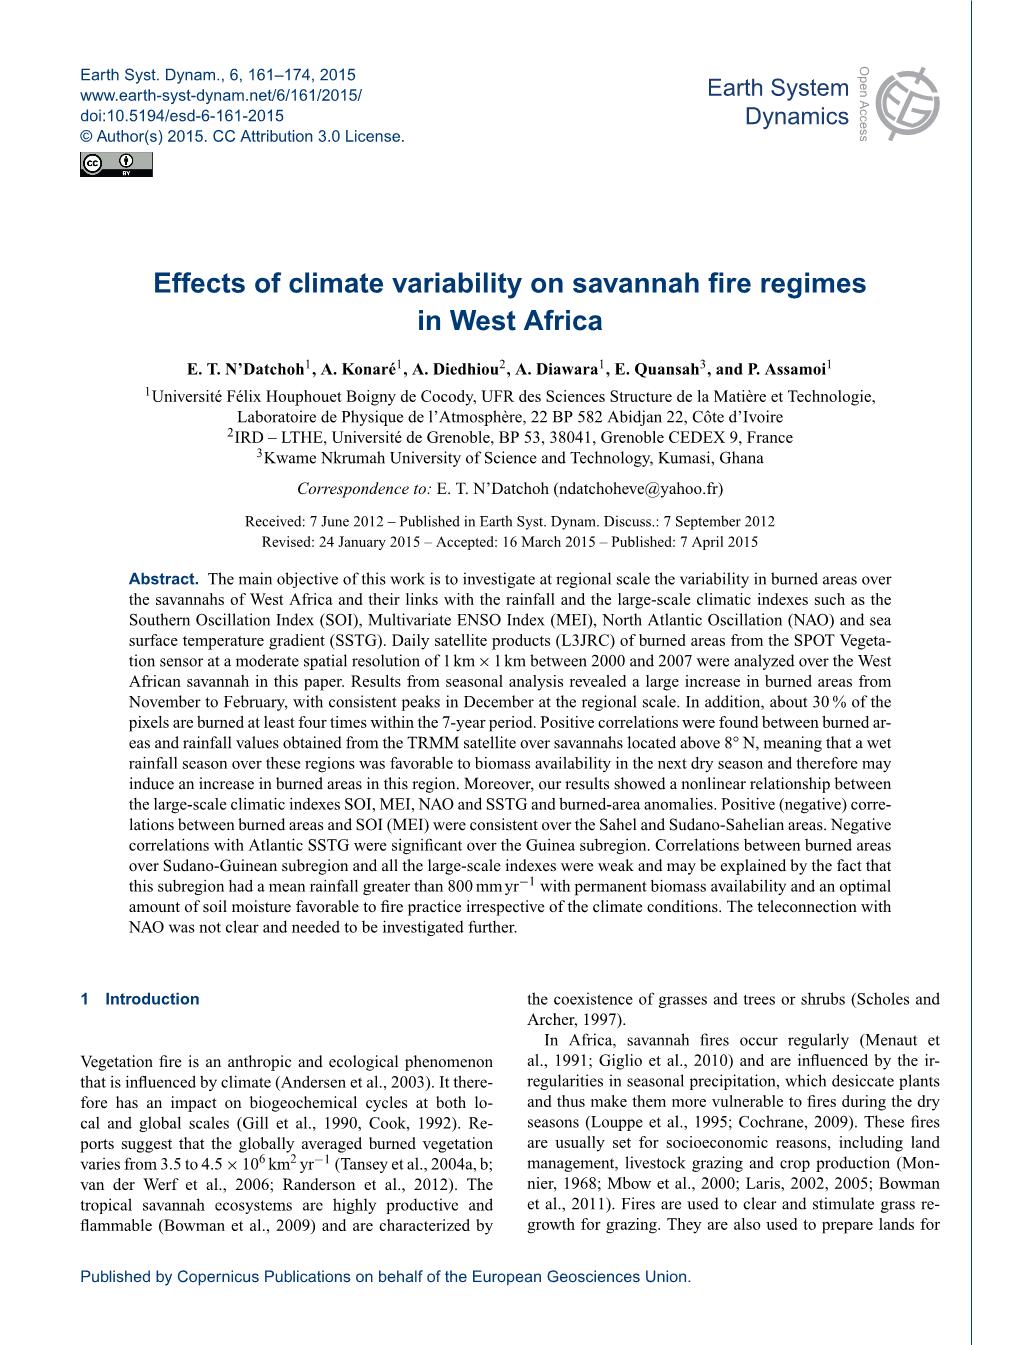 Effects of Climate Variability on Savannah Fire Regimes in West Africa